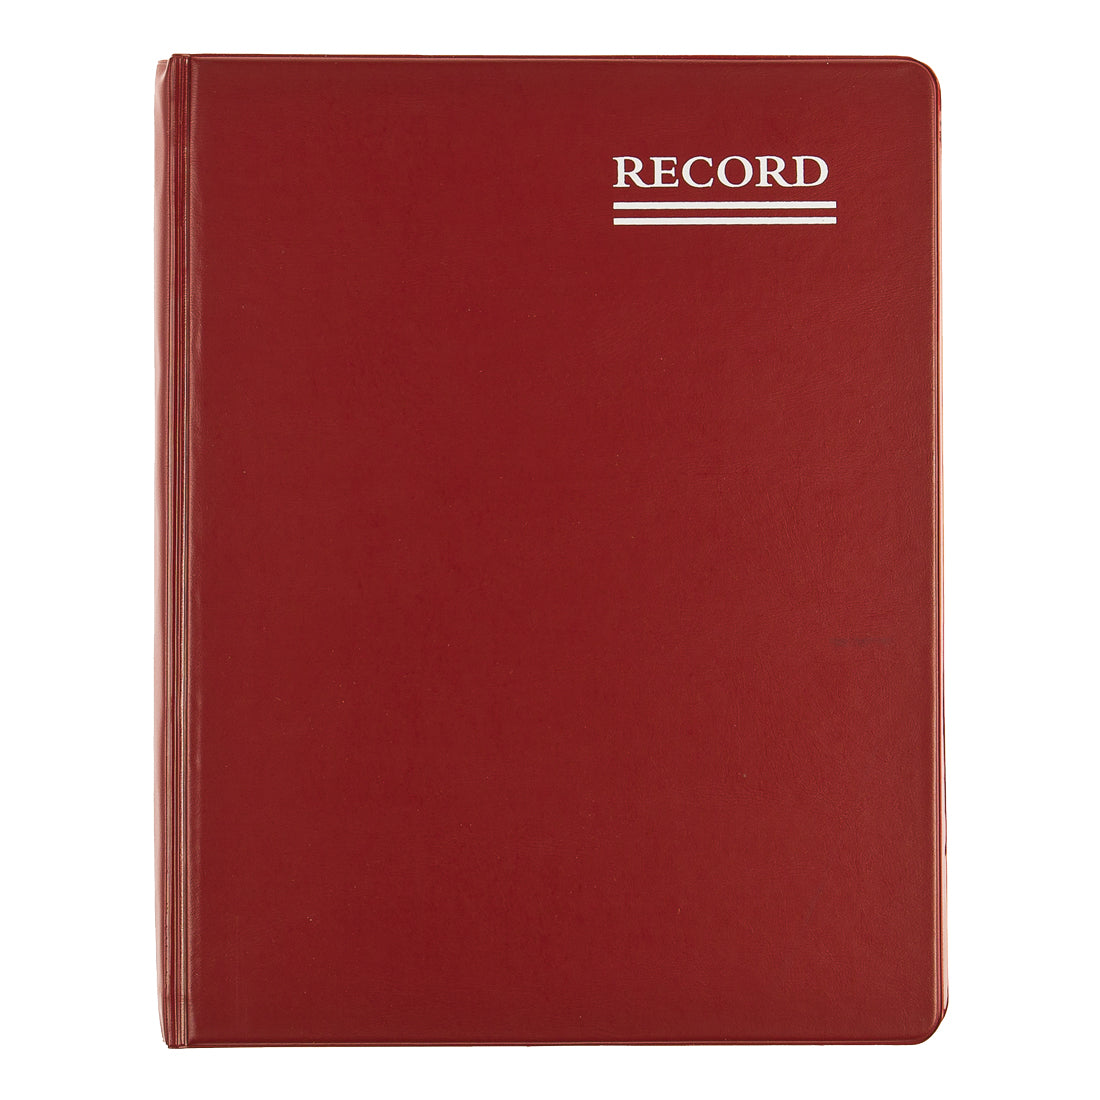 Red Vinyl Series Record Book